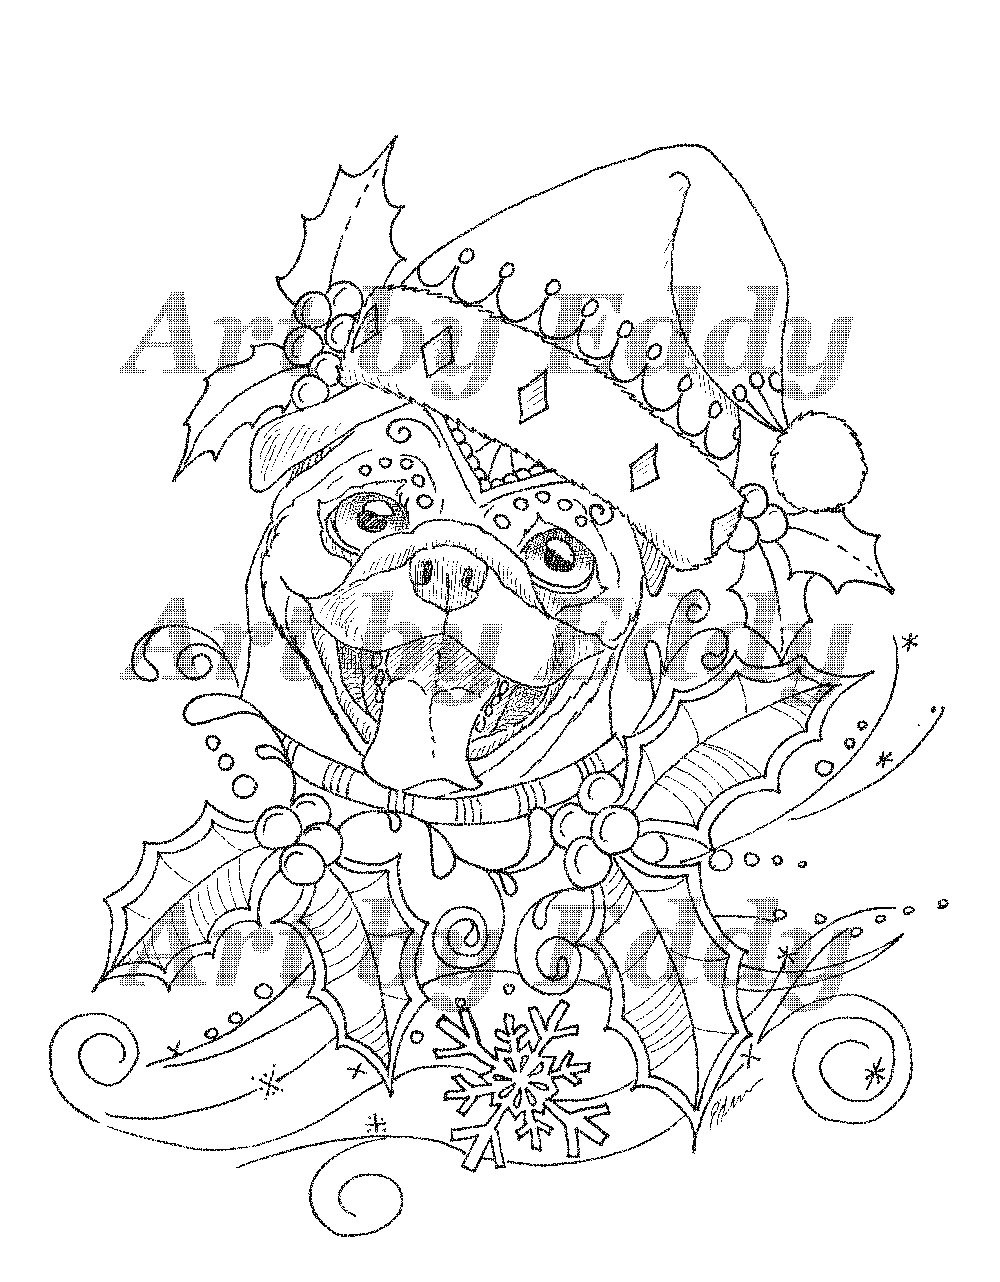 Pug Coloring Book
 Art of Pug Coloring Book Volume No 1 Physical Book